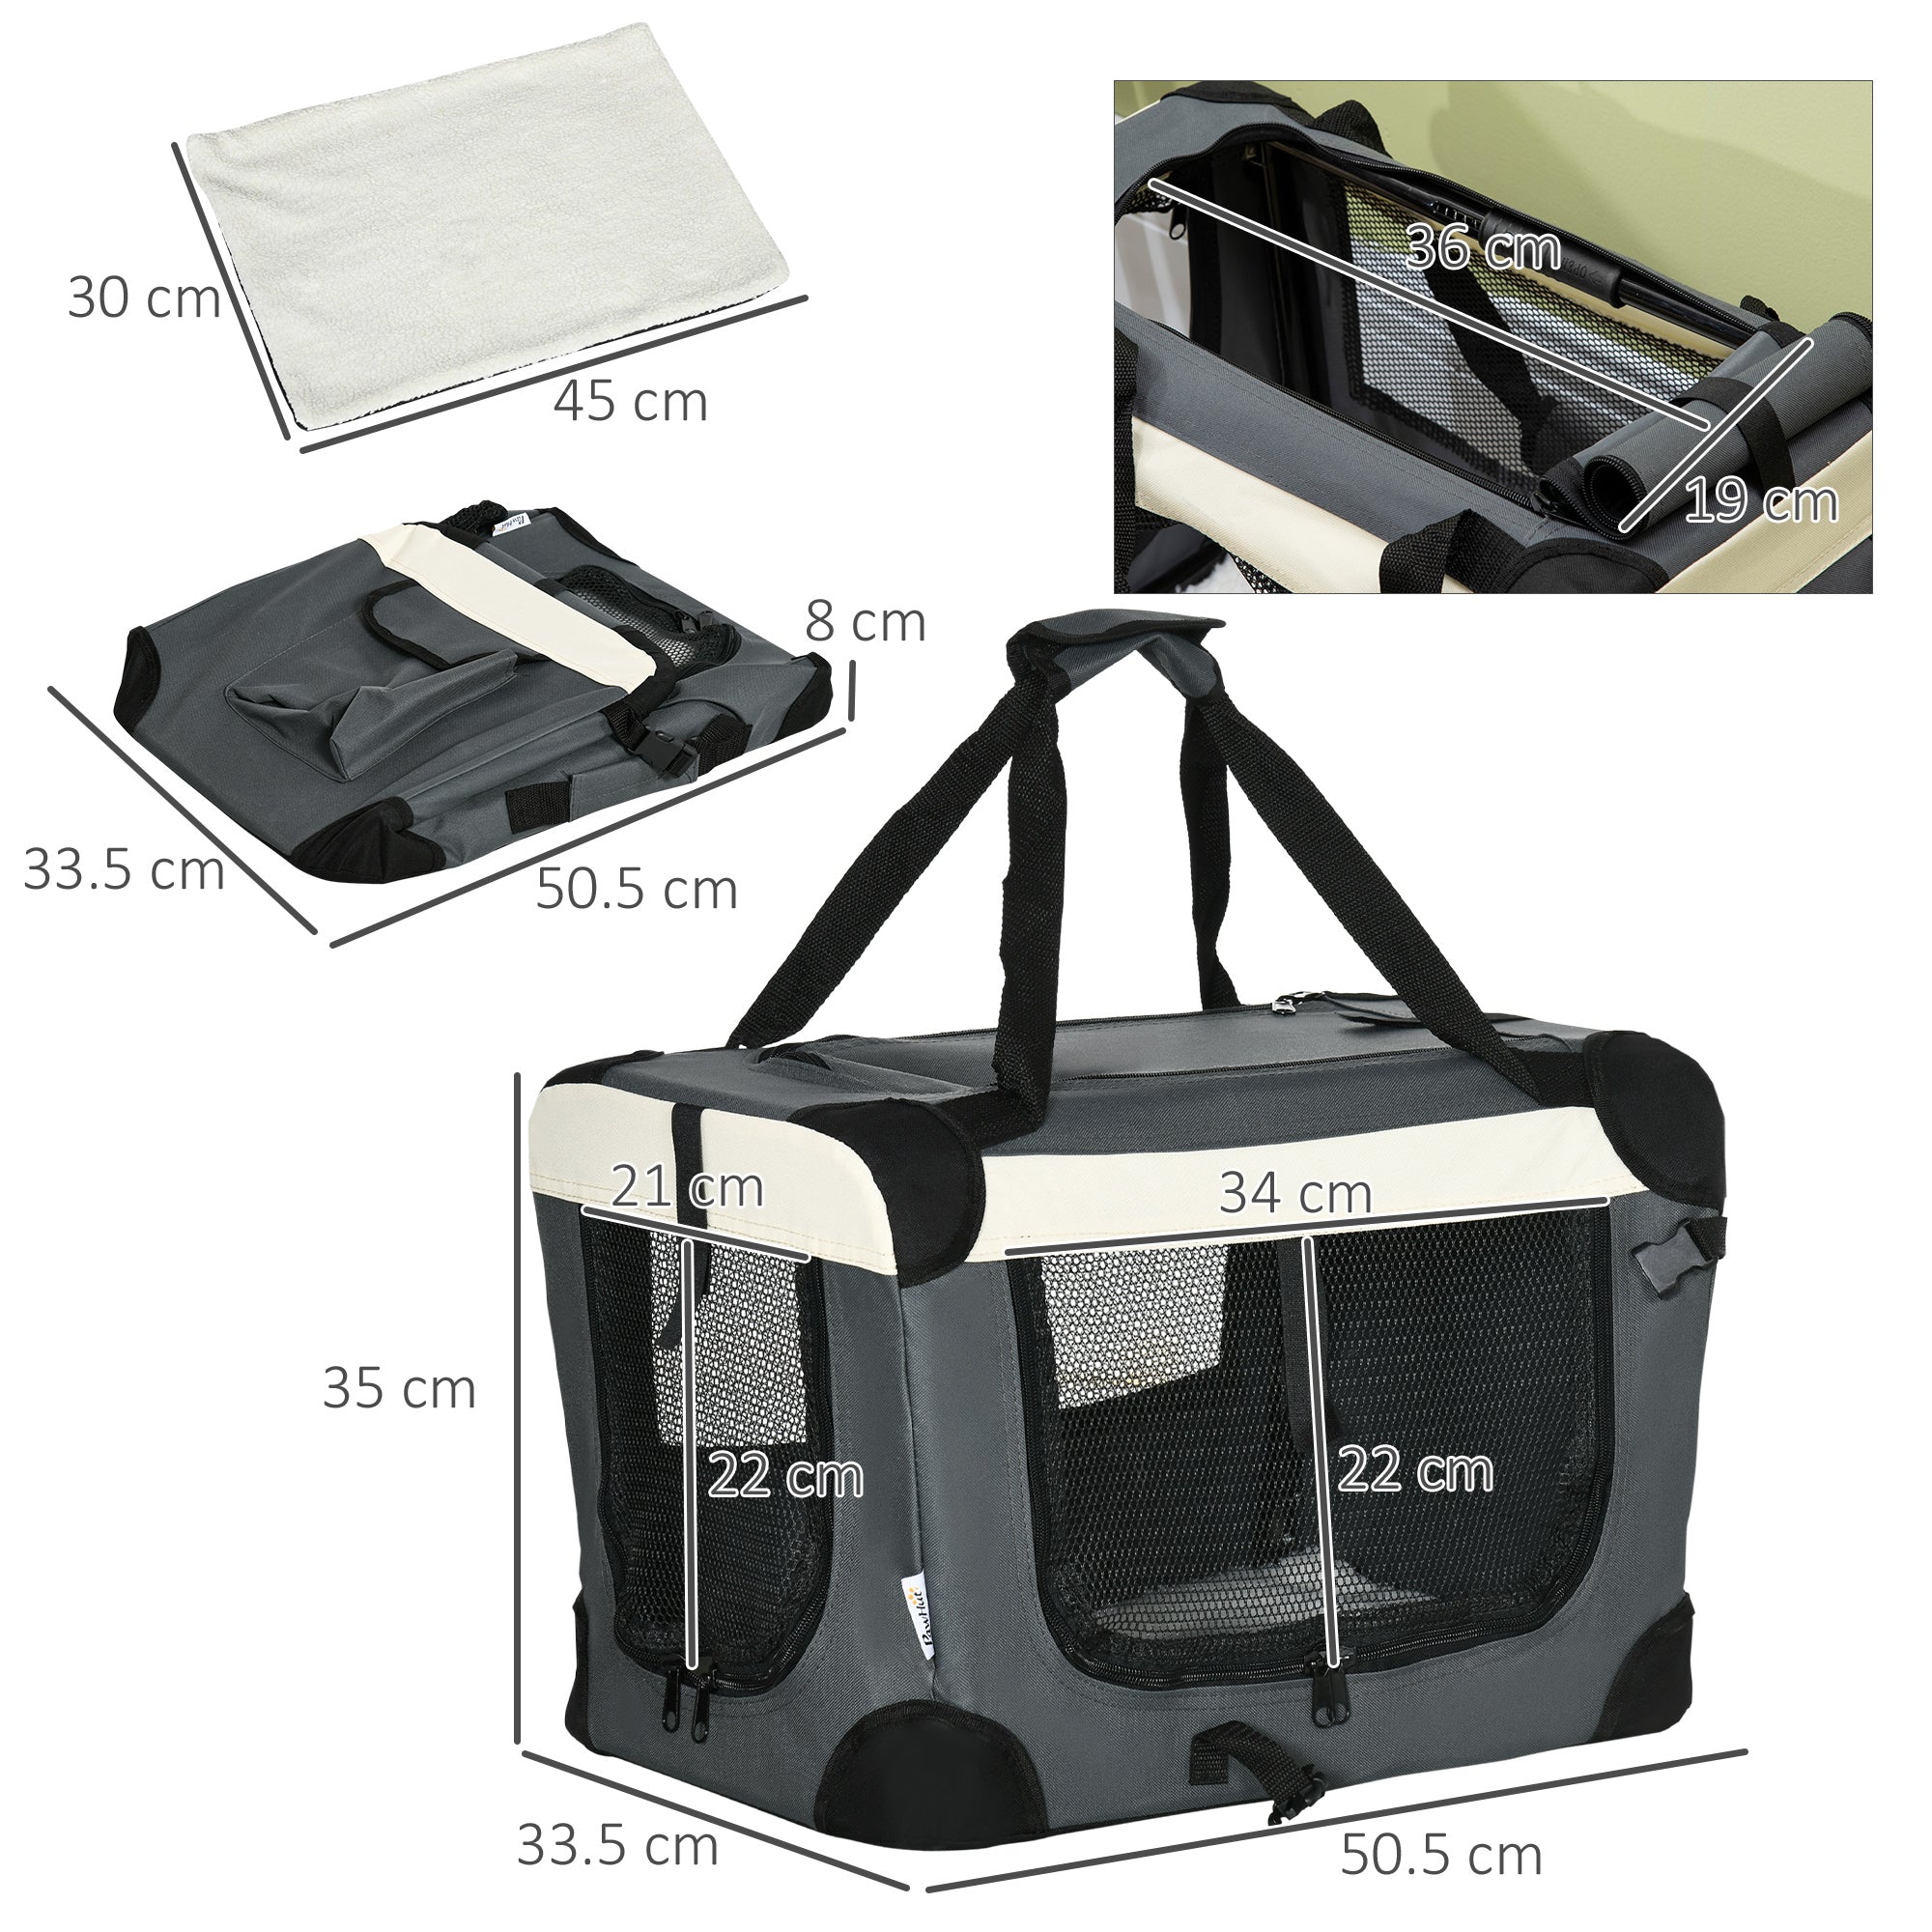 51cm Foldable Pet Carrier, Dog Cage, Portable Cat Carrier, Cat Bag, Pet Travel Bag with Cushion for Miniature Dogs, Grey-2